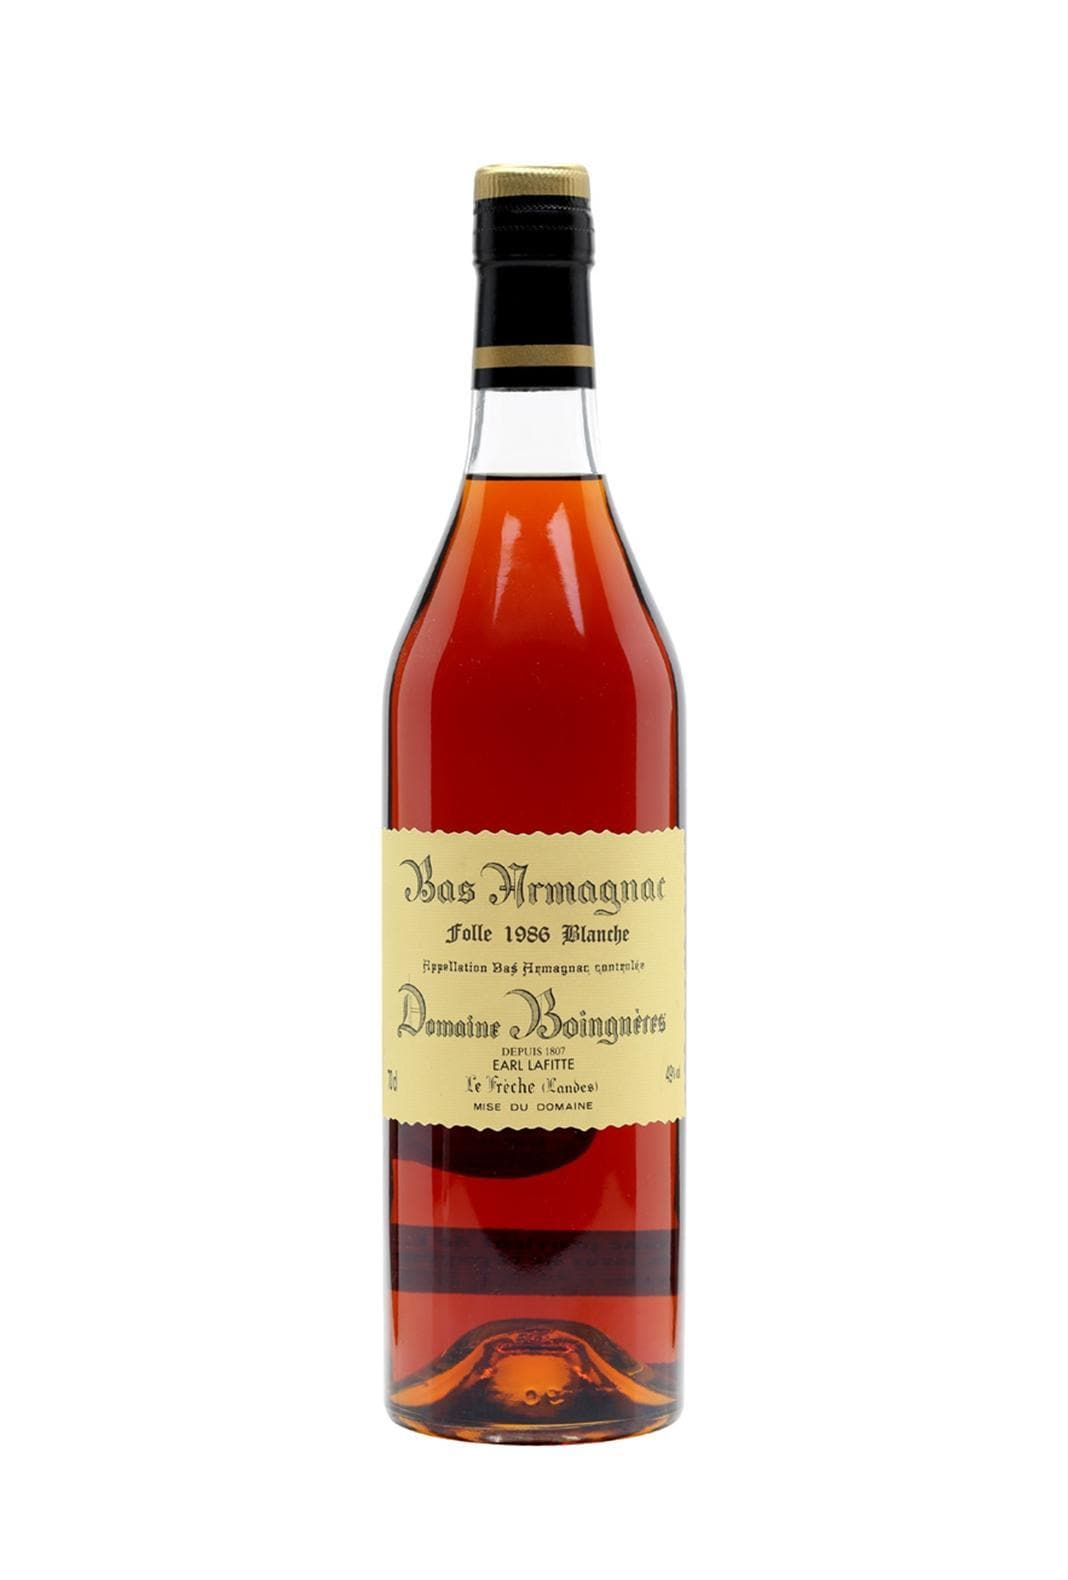 Domaine Boingneres 1986 Bas Armagnac Folle Blanche 49% 700ml | Brandy | Shop online at Spirits of France